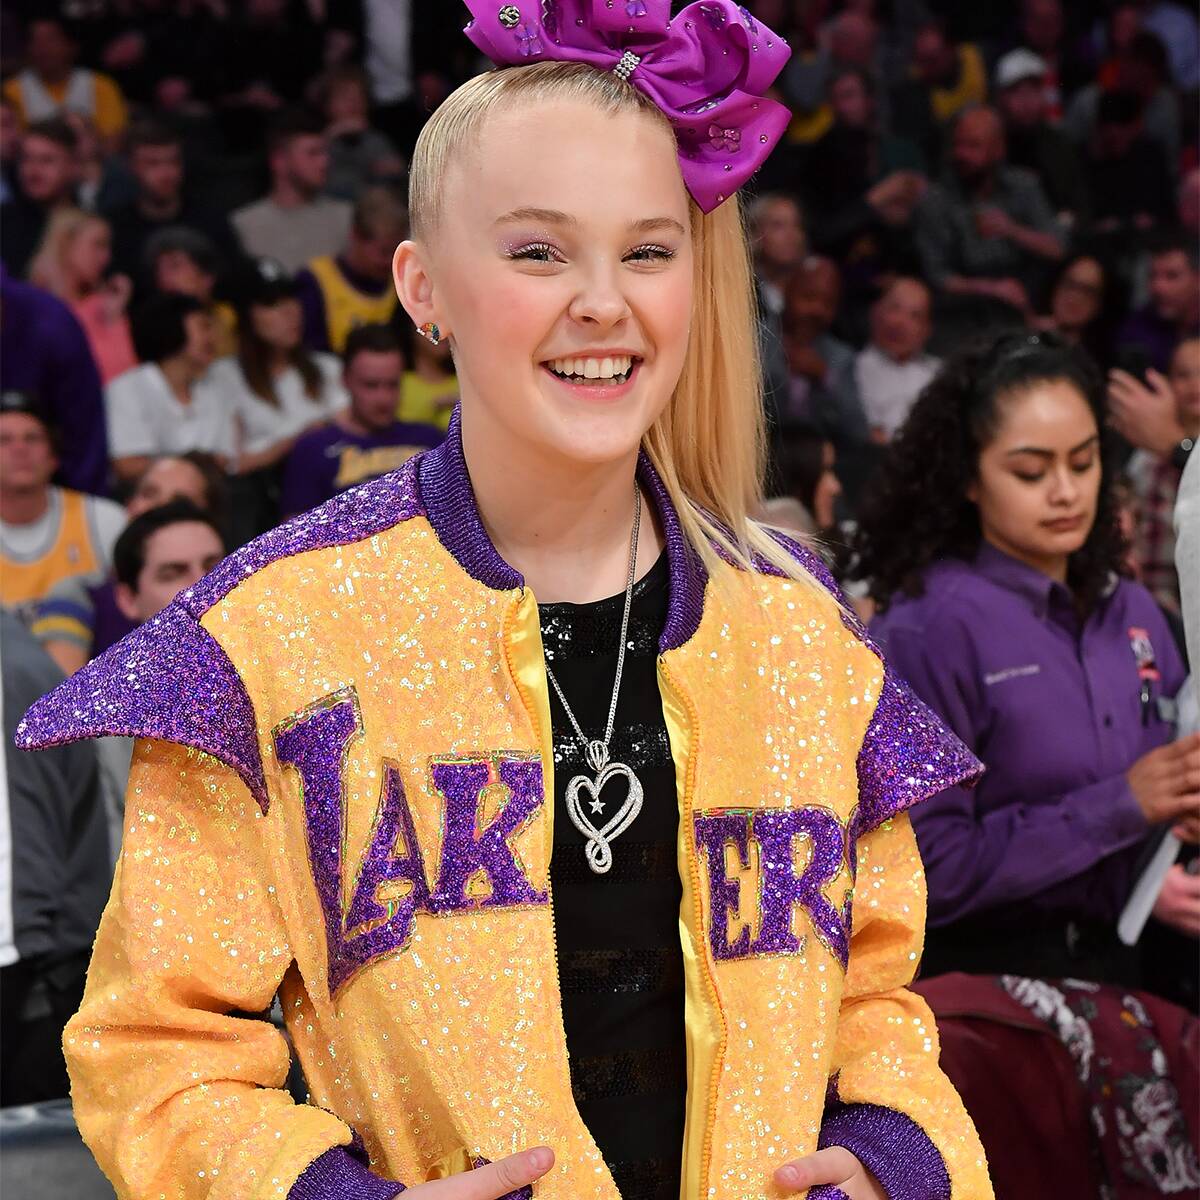 Jojo Siwa Says She's "Really, Really Happy" in Heartfelt Video About Coming Out